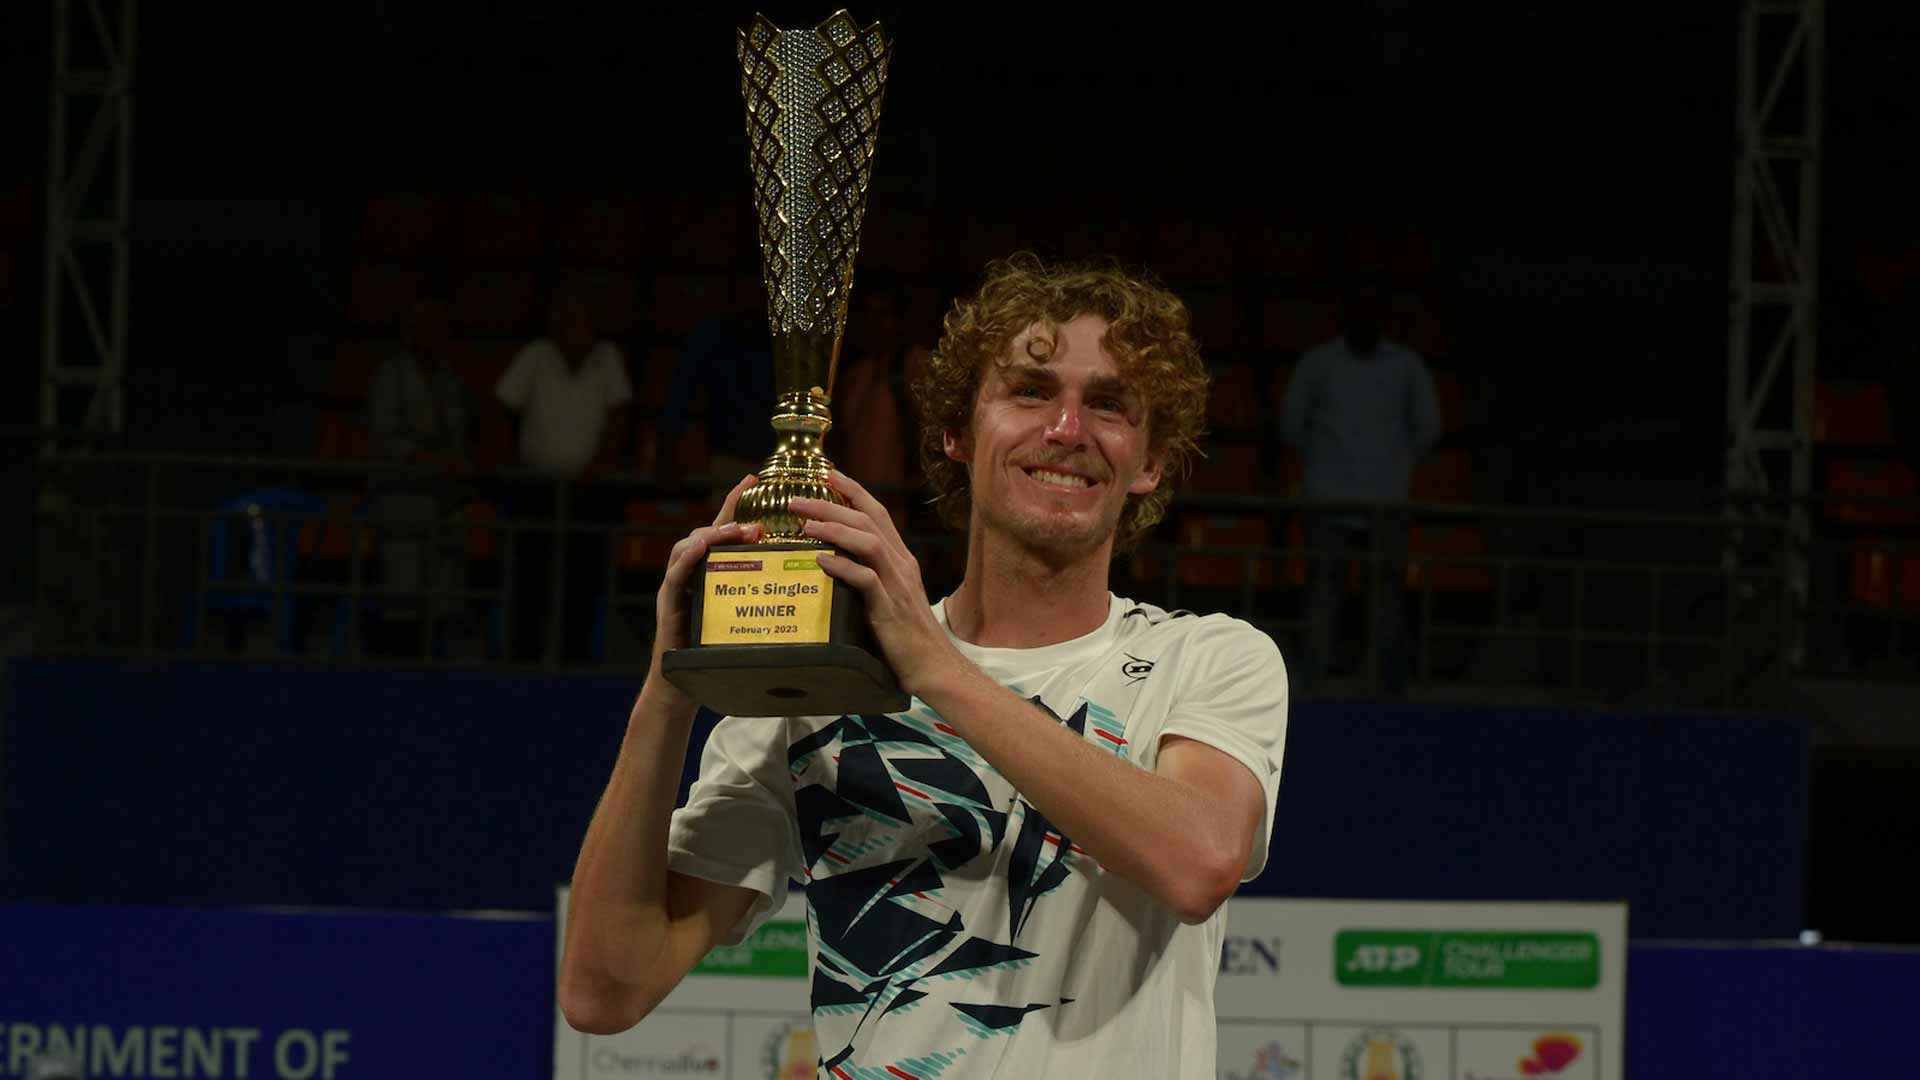 <a href='https://www.atptour.com/en/players/max-purcell/ph71/overview'>Max Purcell</a> is crowned champion in Chennai, India.